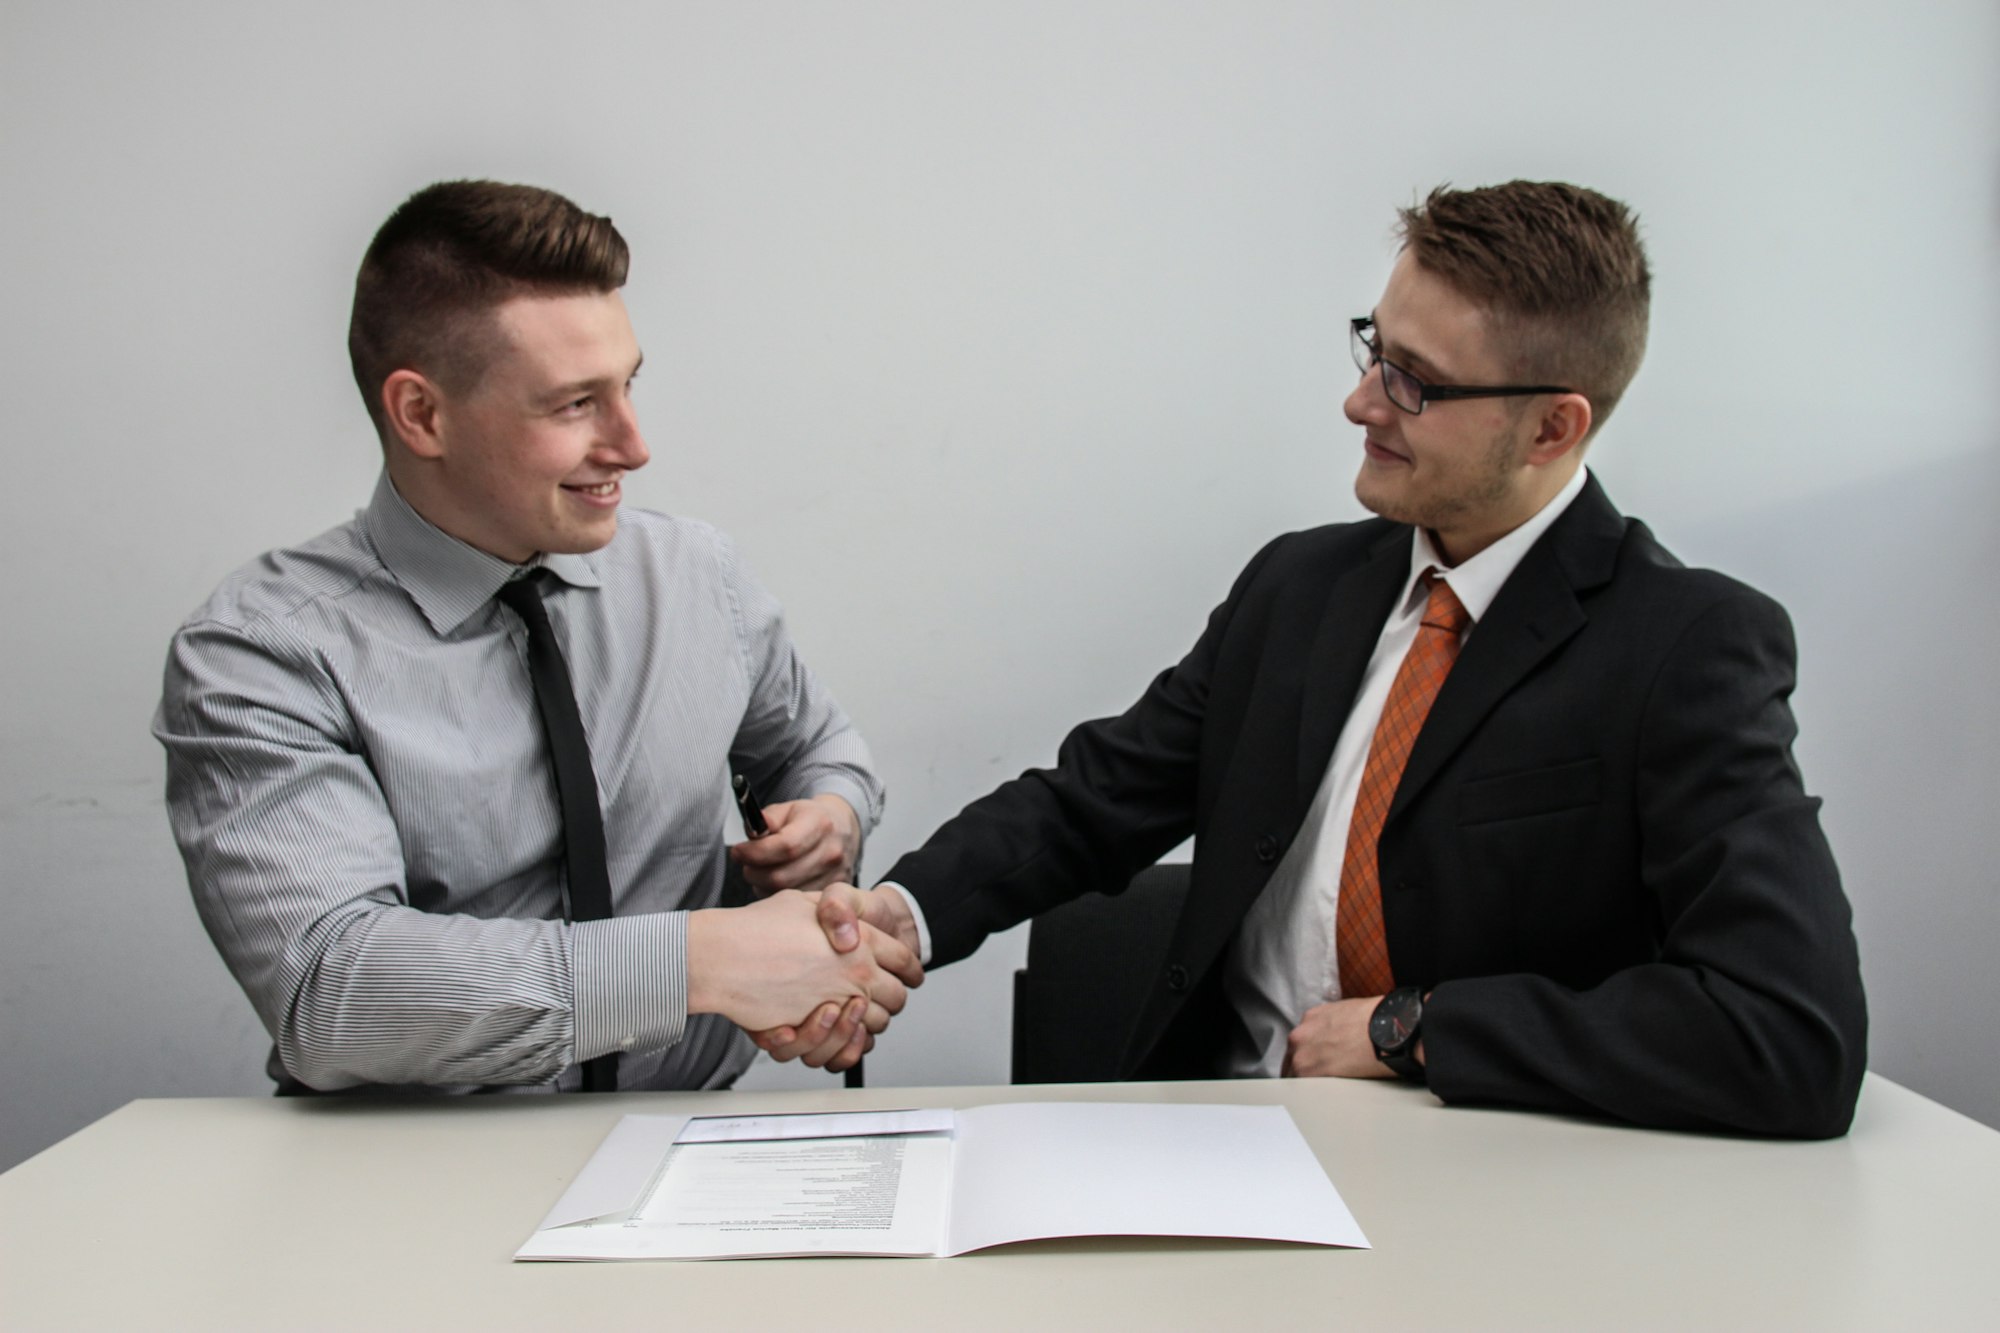 men shaking hands over a signed contract at a table